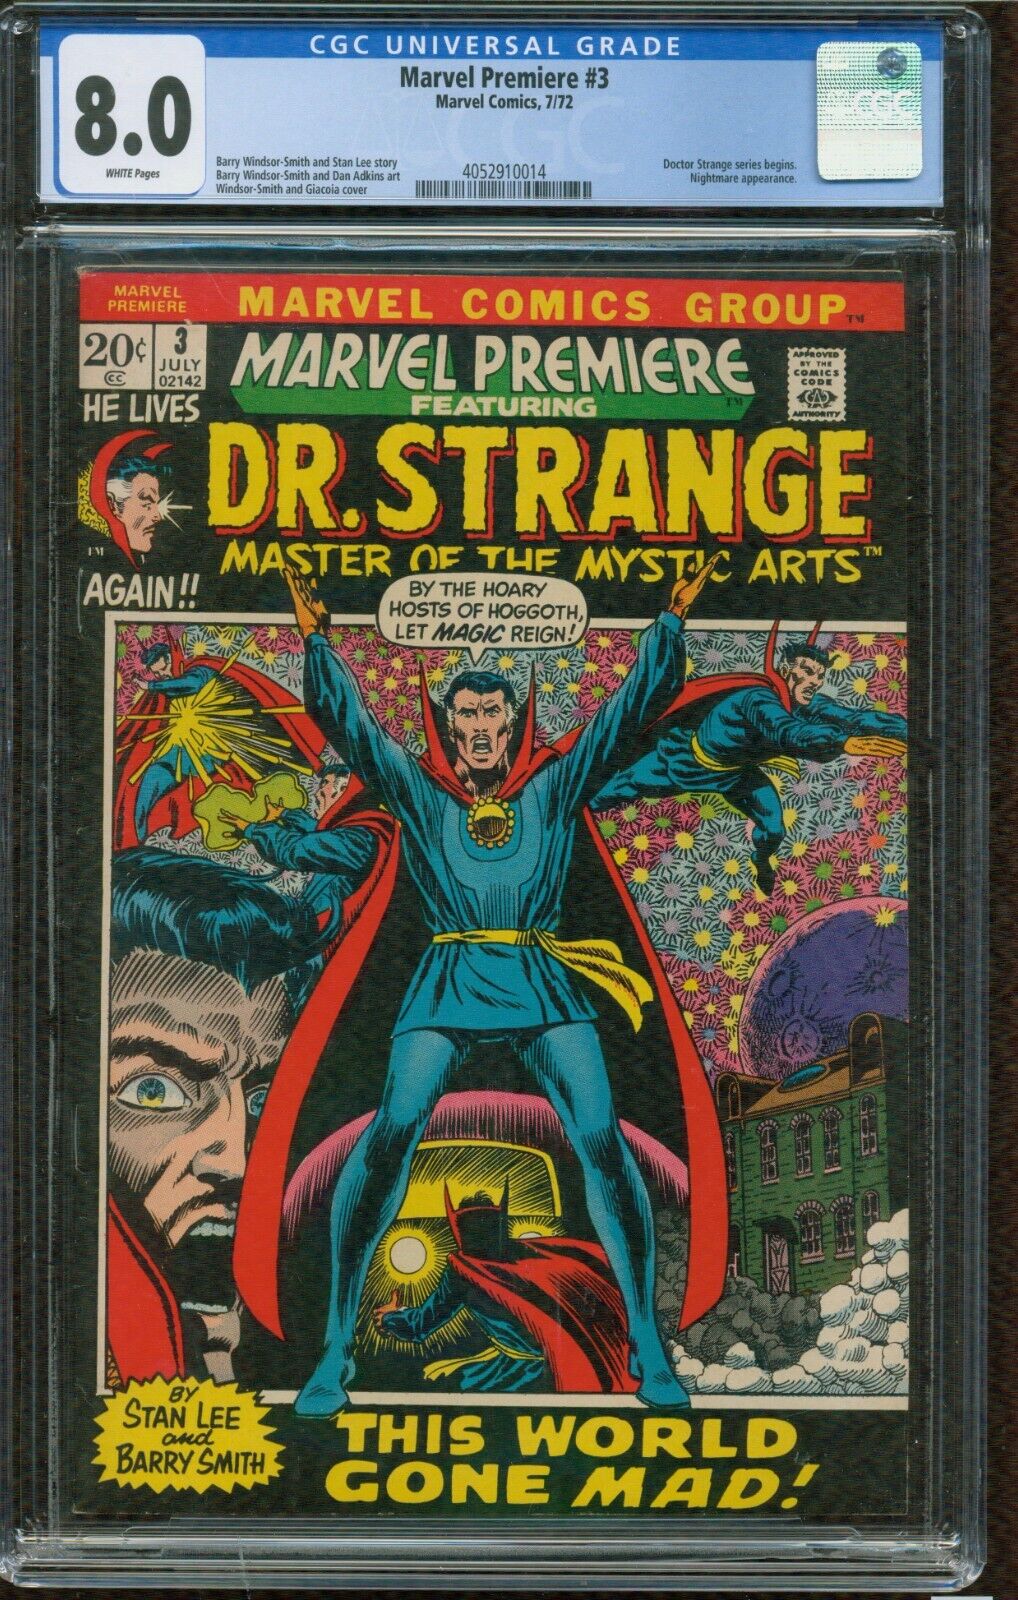 MARVEL PREMIERE #3 DR. STRANGE July 1972 CGC 8.0 White Pages KEY ISSUE ID: G-847